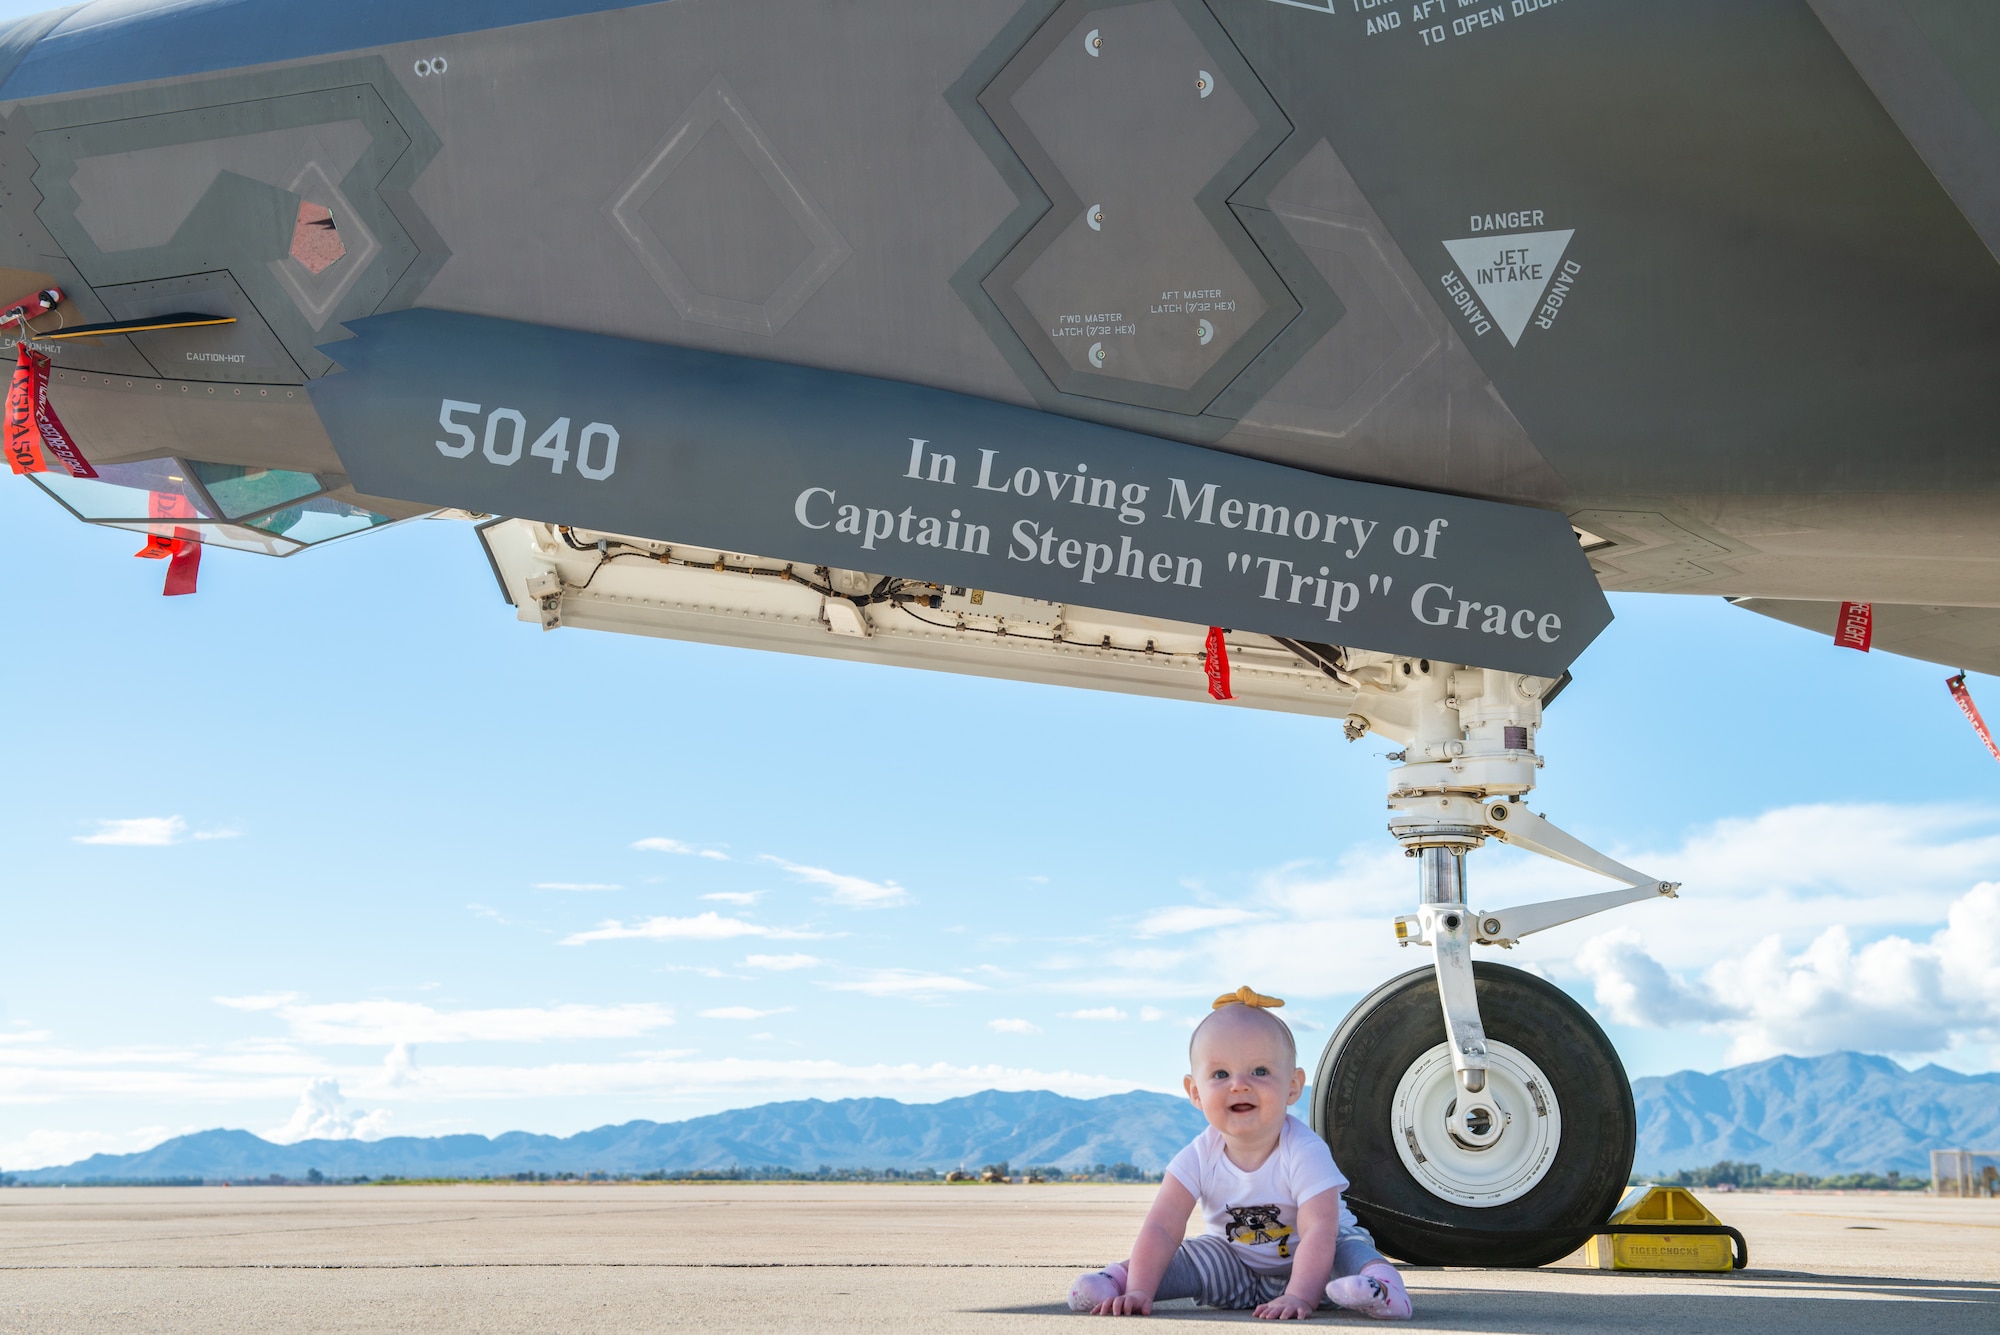 Georgia Grace, daughter of Capt. Stephen “Trip” Grace, sits in front of an F-35A Lightning II dedicated in her father’s name Dec. 7, 2018, at Luke Air Force Base, Ariz. Capt. Capt. Grace was an instructor pilot in the 61st Fighter Squadron and was twice recognized as Company Grade Officer of the Quarter. (U.S. Air Force photo by Senior Airman Alexander Cook)